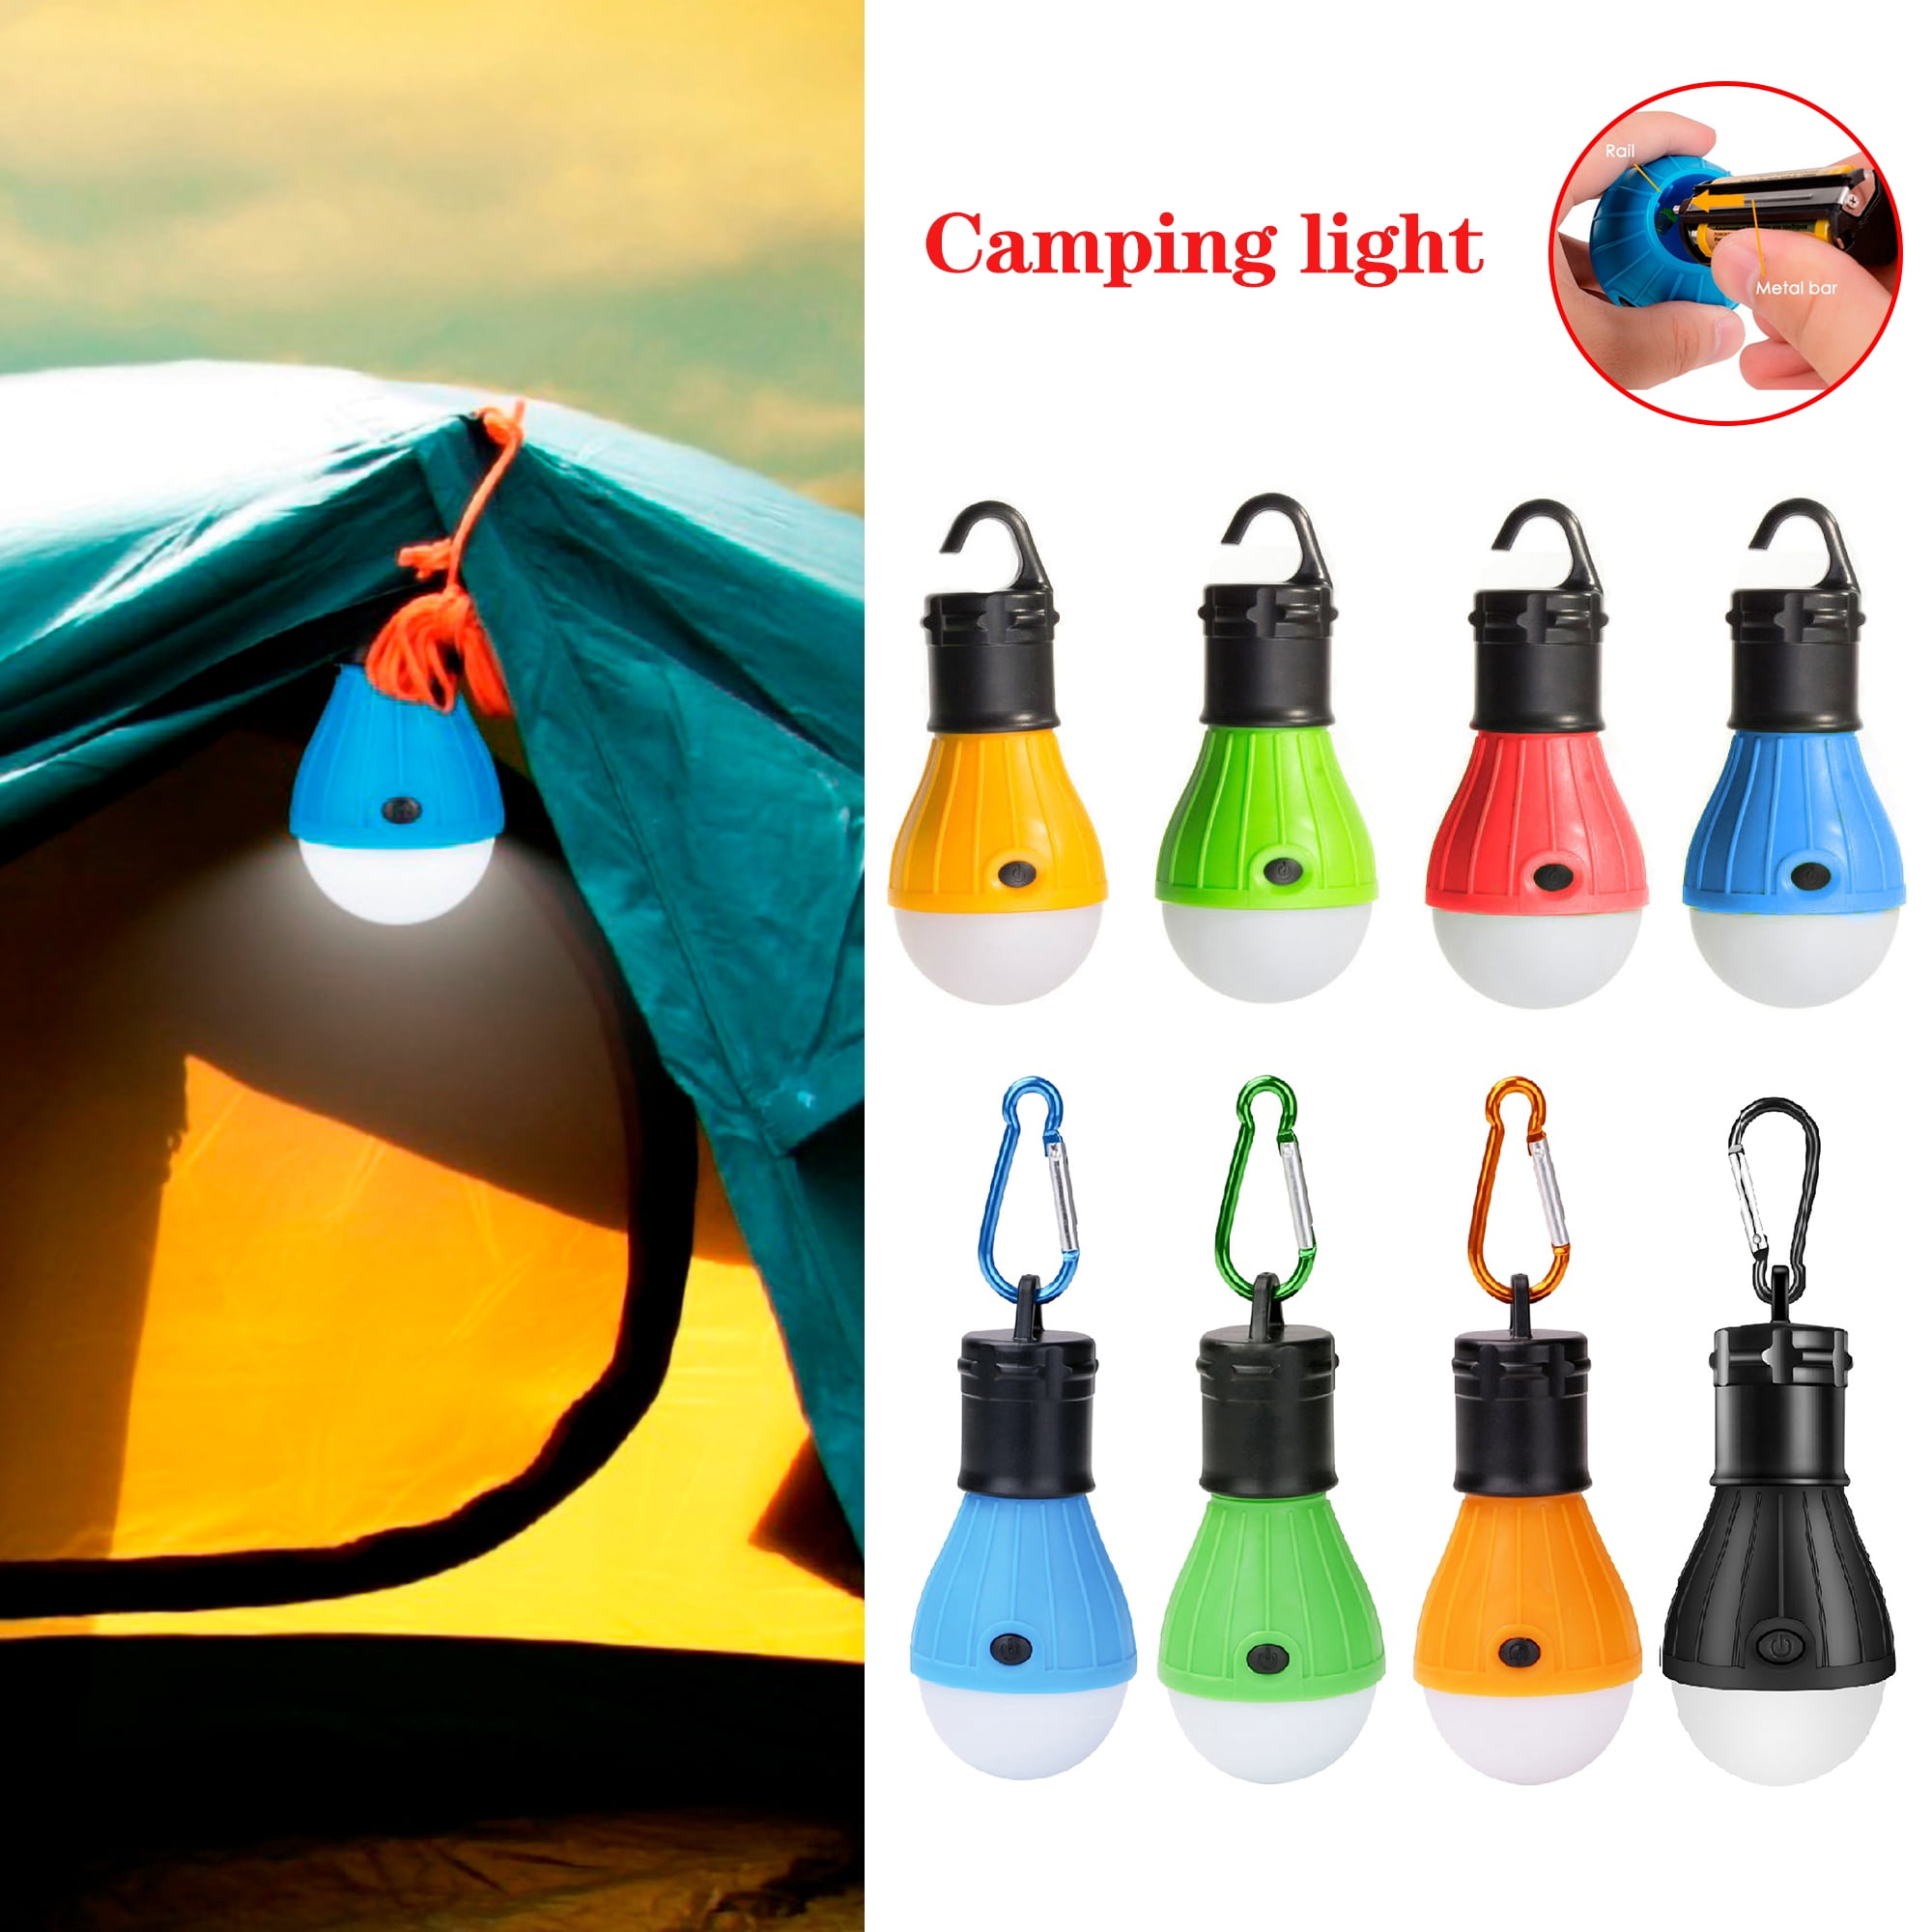 2x 60W LED Camping Light USB Rechargeable Outdoor Tent Lamp Hiking Lantern Lamp 